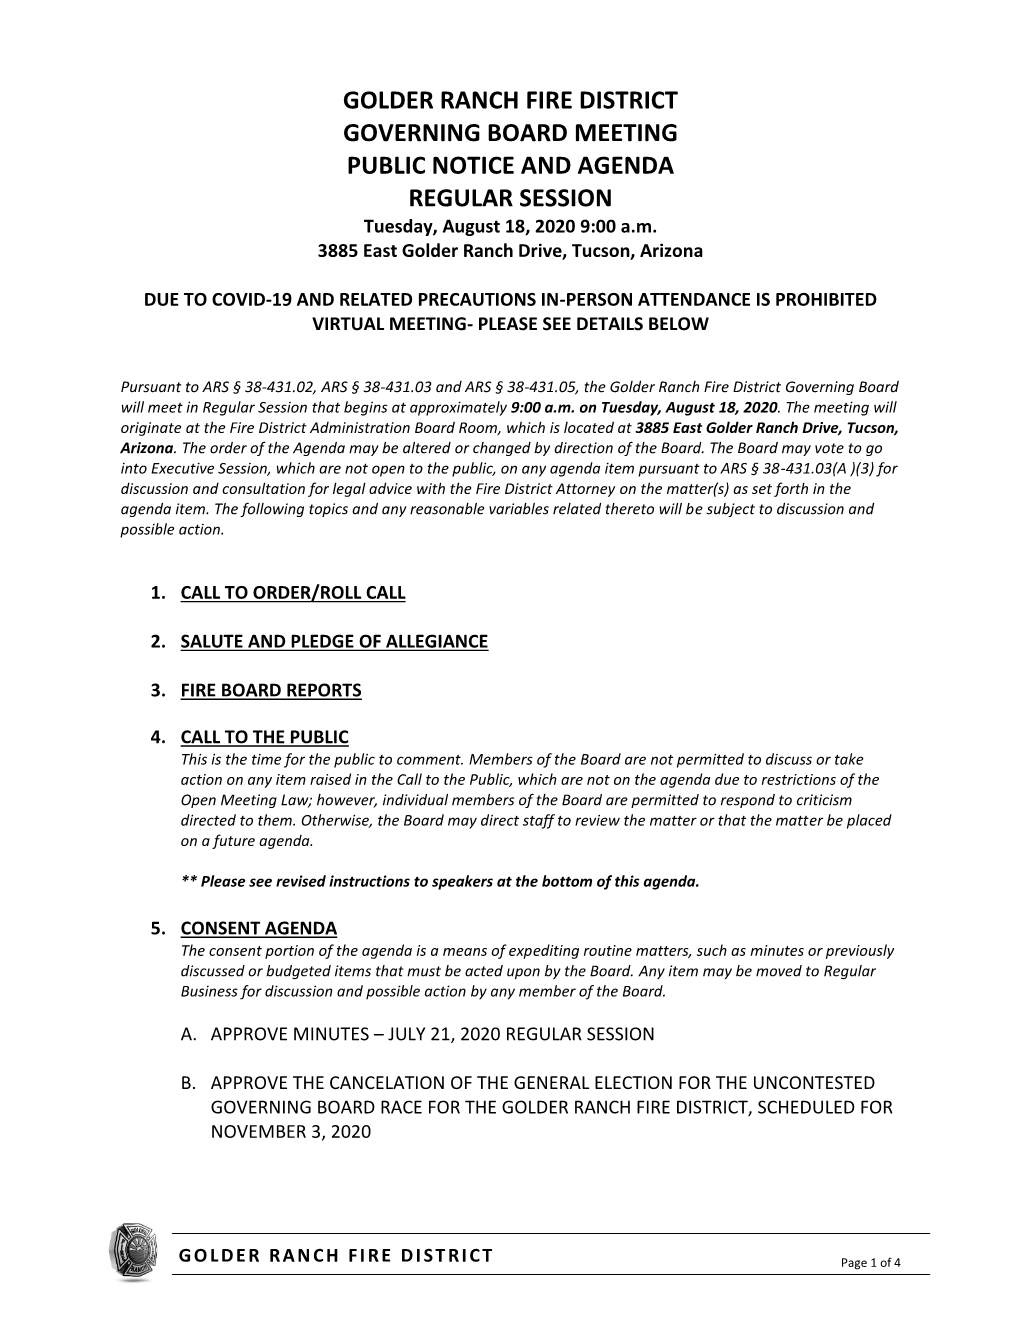 GOLDER RANCH FIRE DISTRICT GOVERNING BOARD MEETING PUBLIC NOTICE and AGENDA REGULAR SESSION Tuesday, August 18, 2020 9:00 A.M